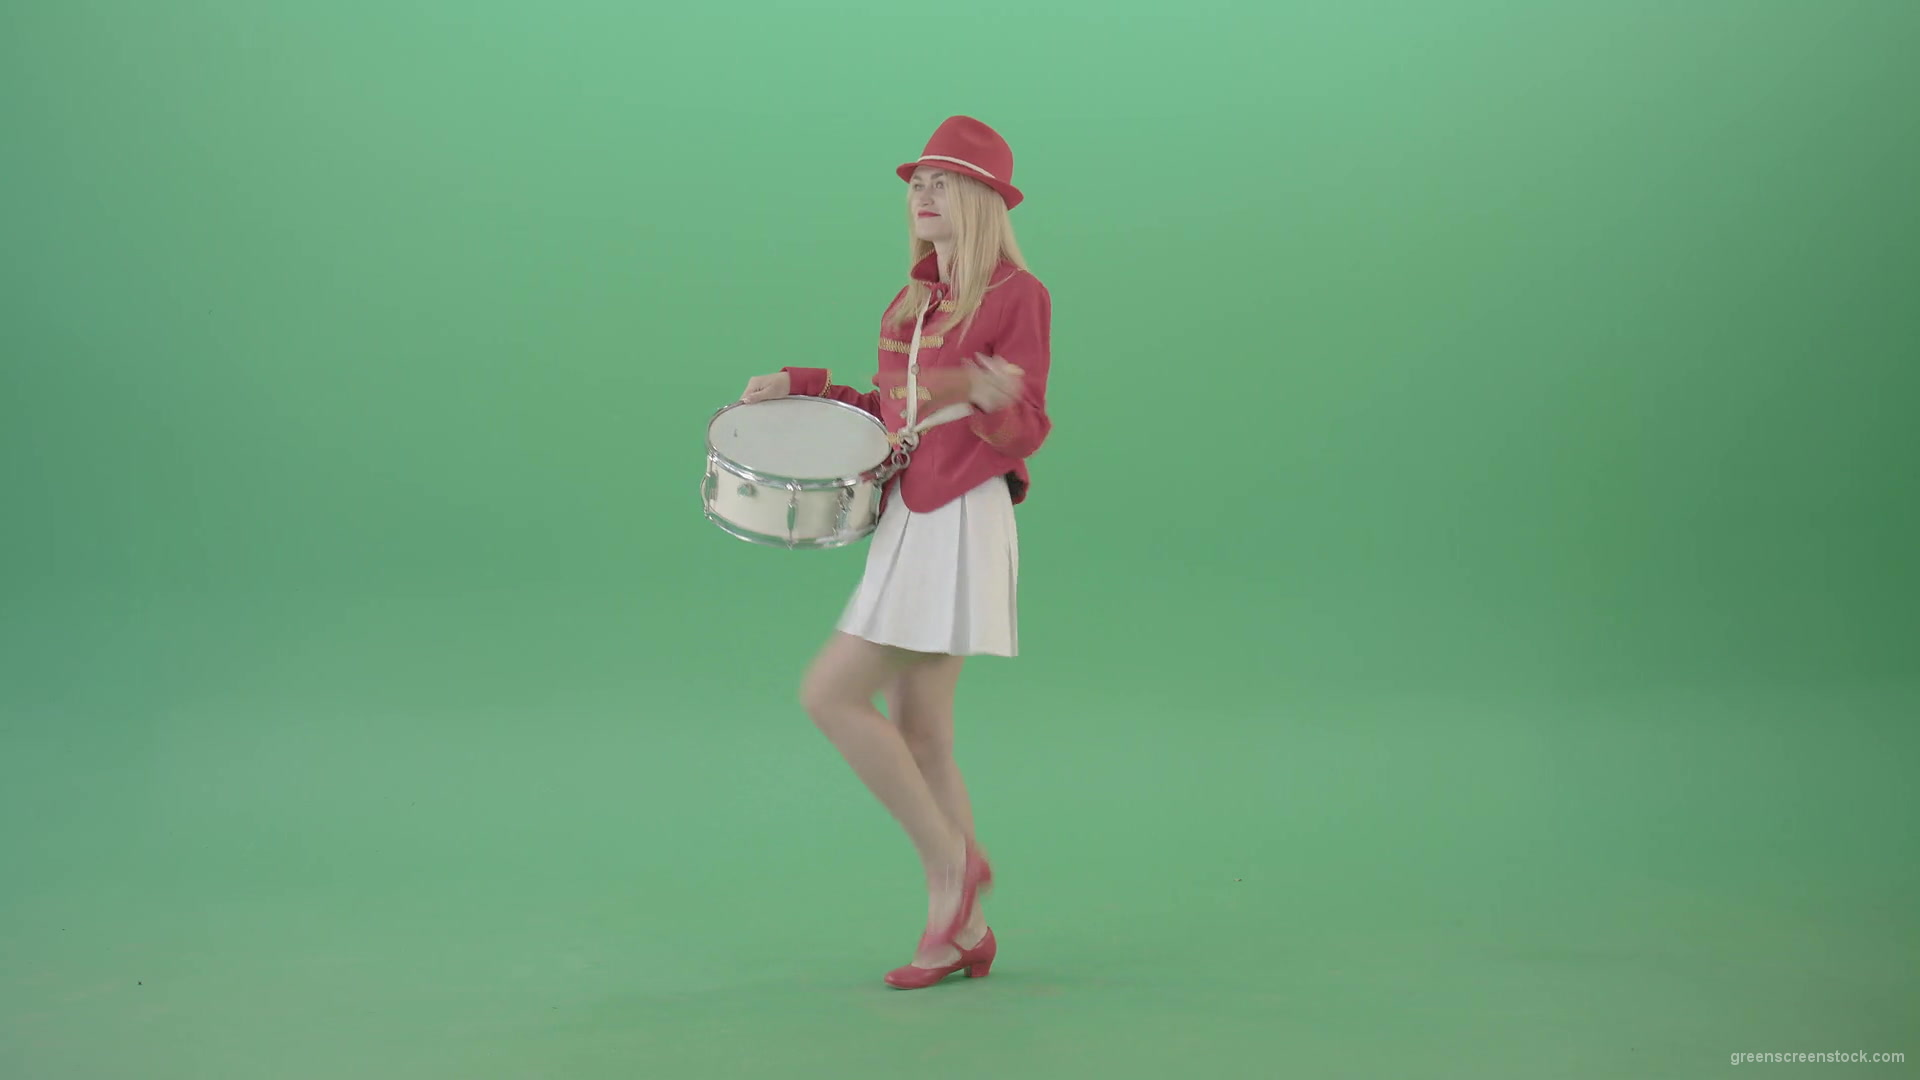 Girl-in-red-uniform-marching-and-play-snare-drum-on-green-screen-4K-Video-Footage-1920_008 Green Screen Stock